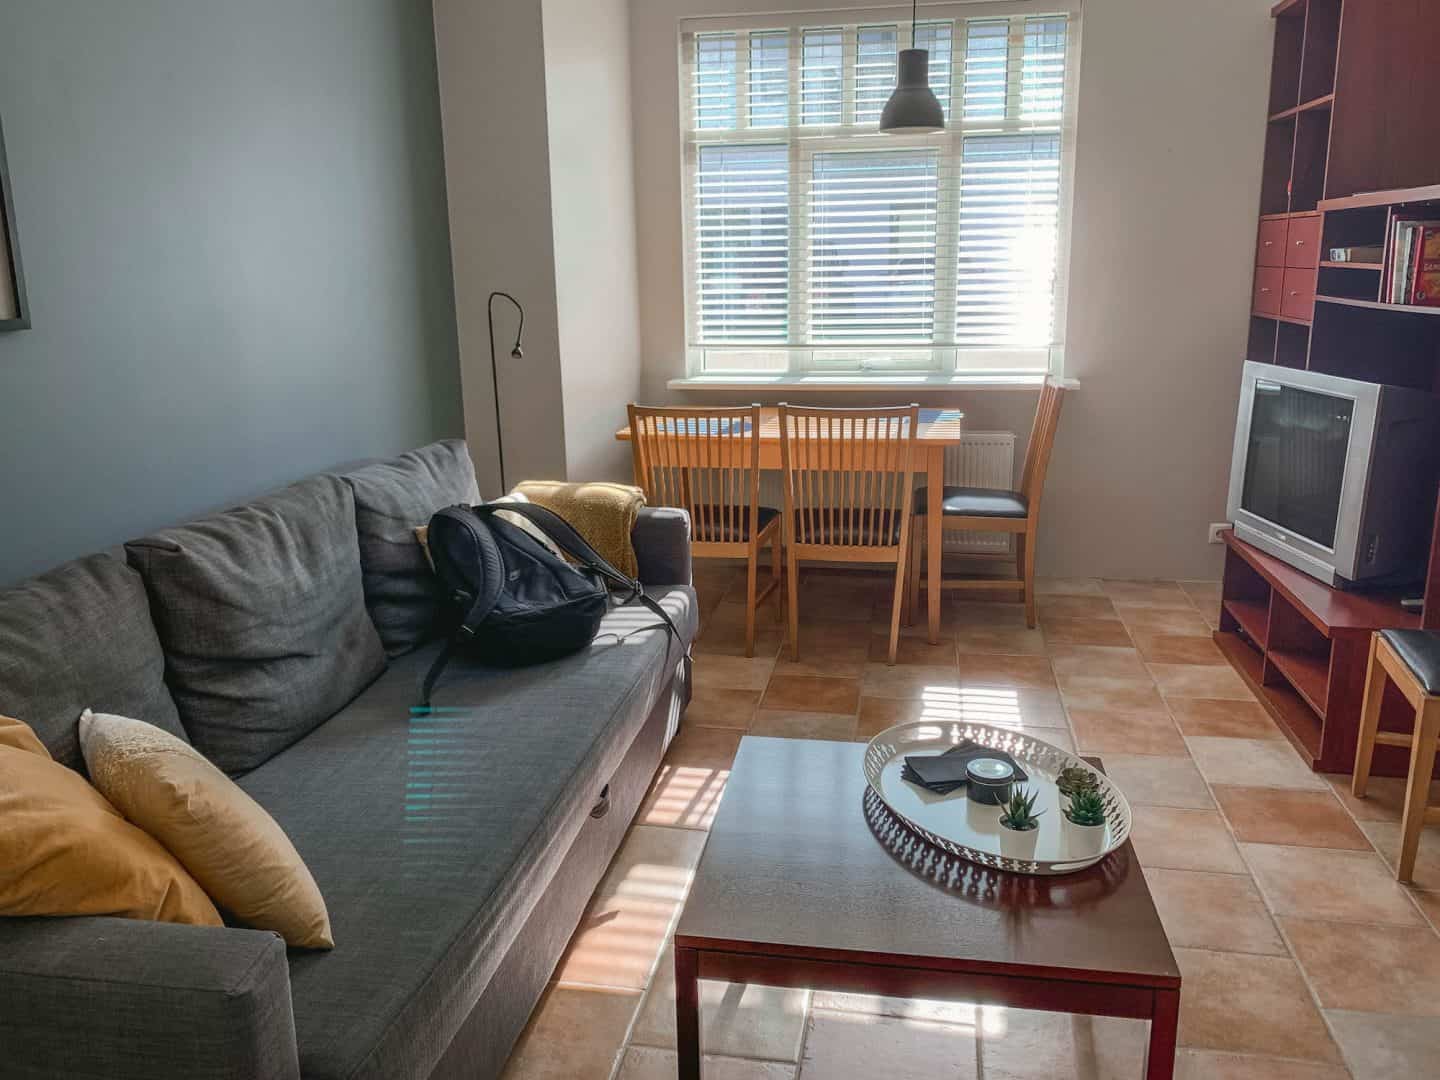 A large living room space in an apartment Airbnb in Iceland